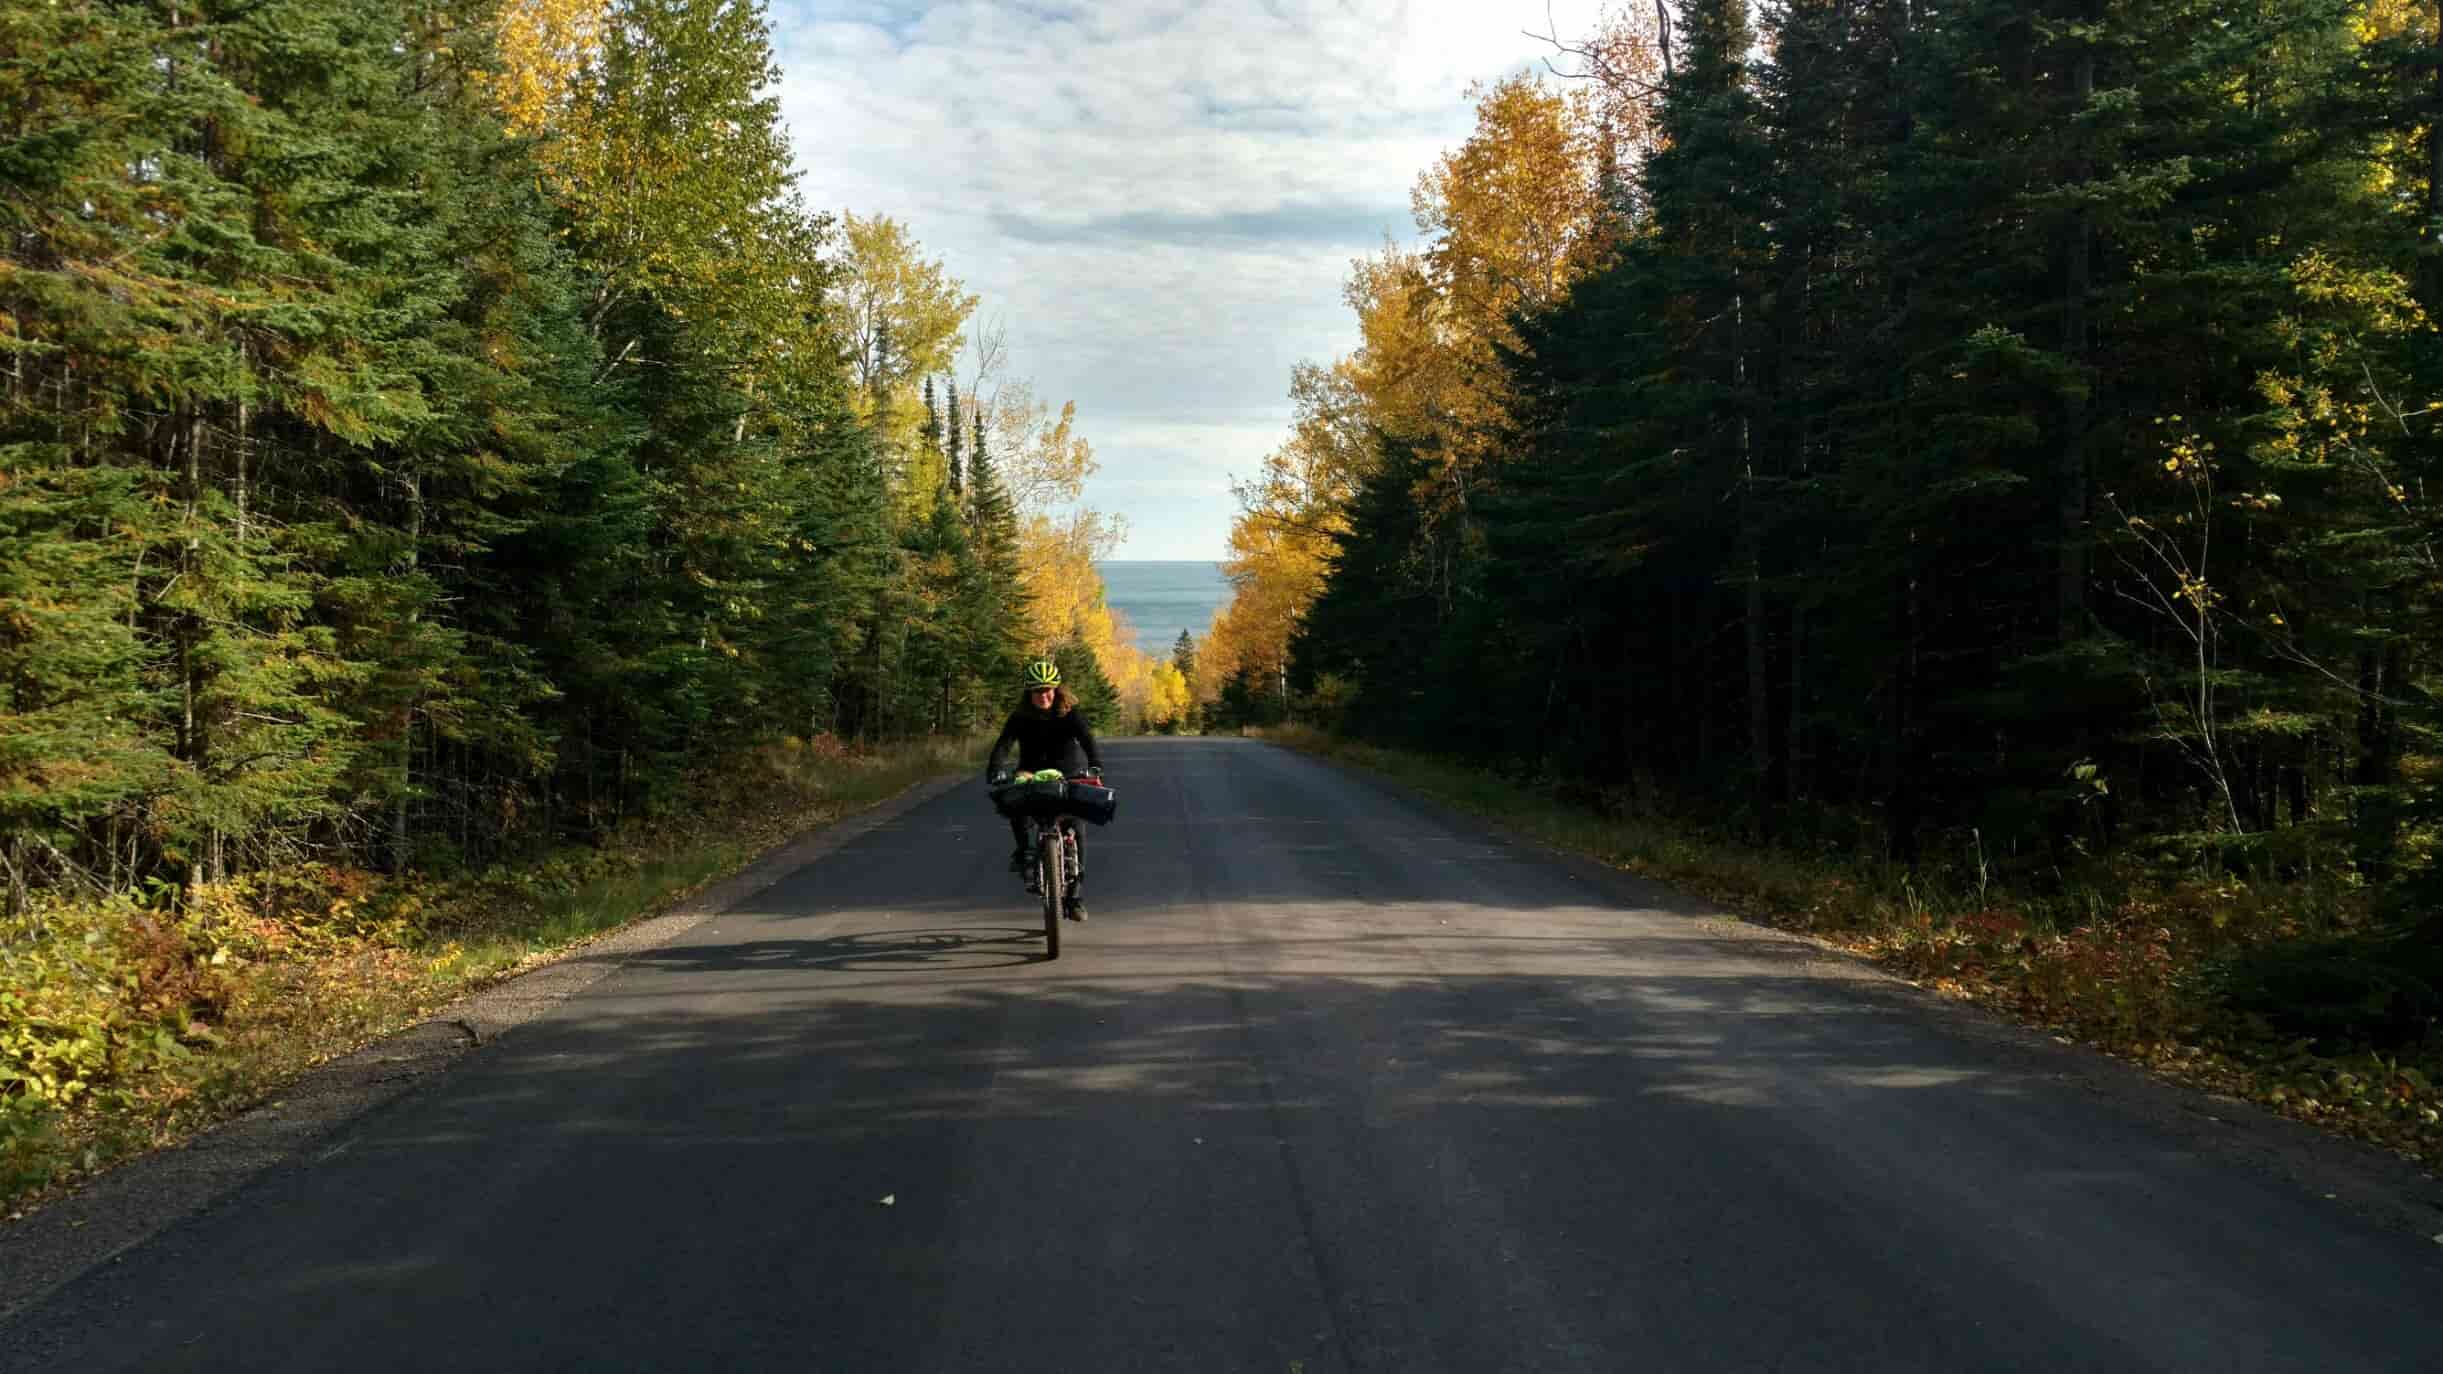 Front view of a cyclist riding down the middle of a paved road with pine trees on both side